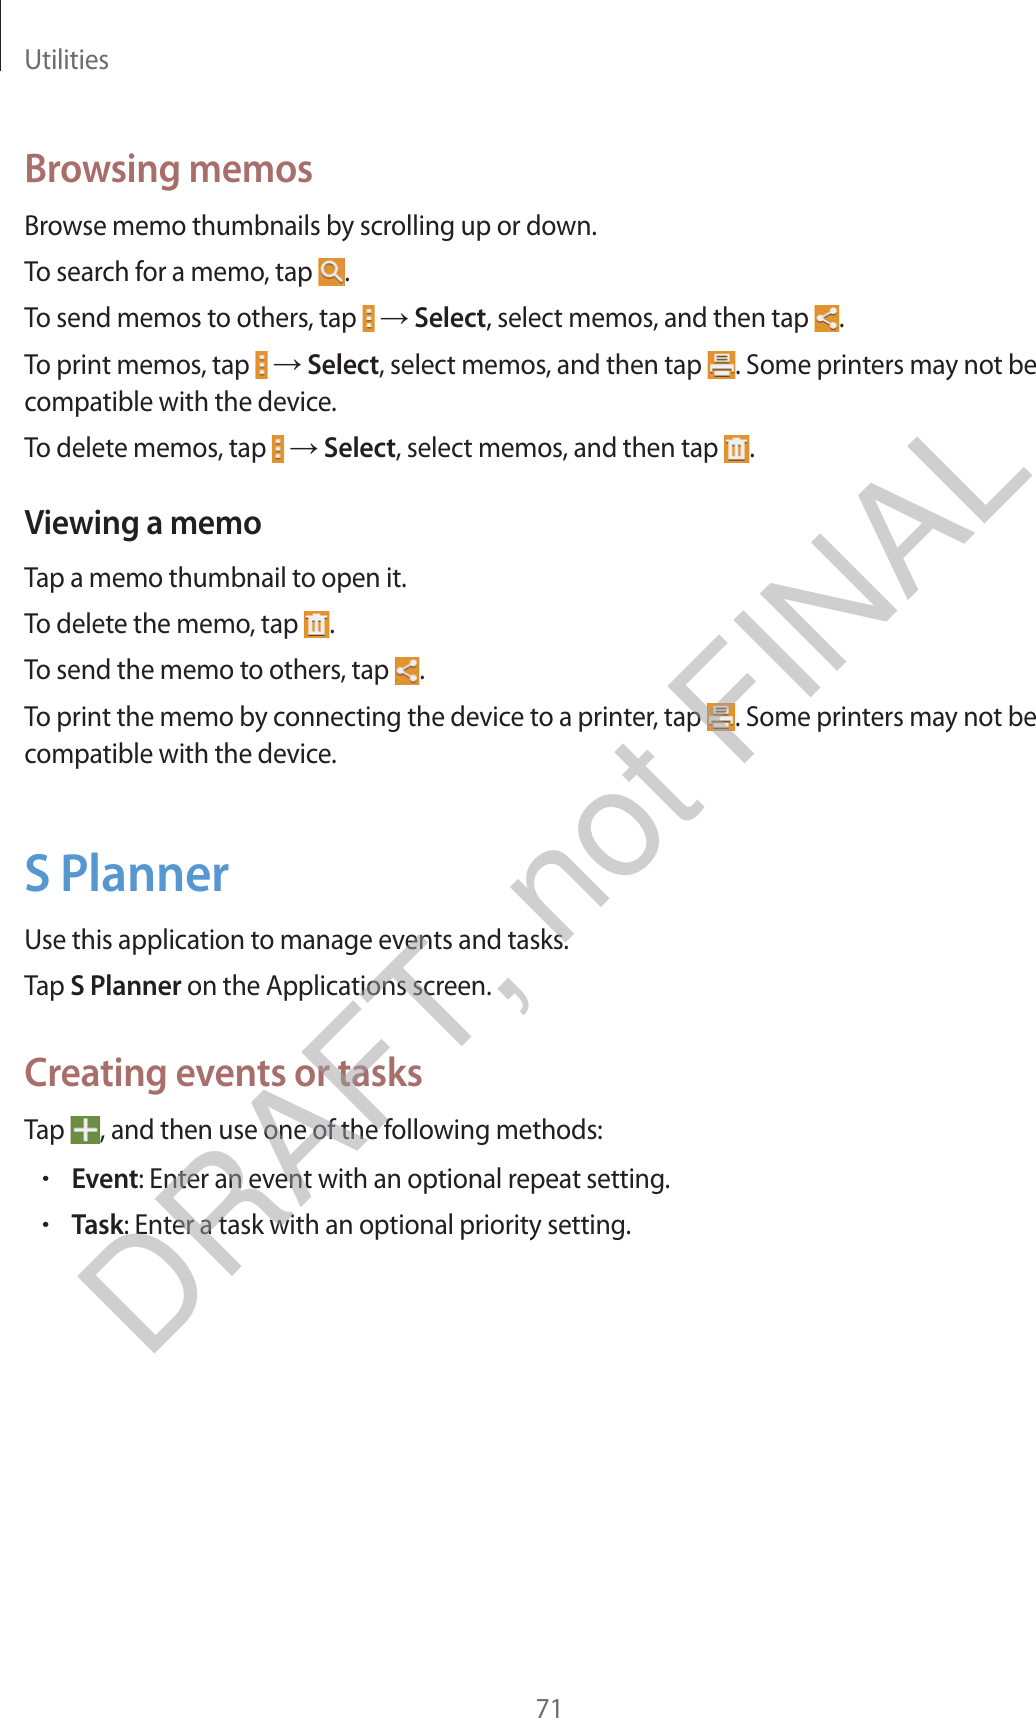 Utilities71Browsing memosBrowse memo thumbnails by scrolling up or down.To search for a memo, tap  .To send memos to others, tap   → Select, select memos, and then tap  .To print memos, tap   → Select, select memos, and then tap  . Some printers may not be compatible with the device.To delete memos, tap   → Select, select memos, and then tap  .Viewing a memoTap a memo thumbnail to open it.To delete the memo, tap  .To send the memo to others, tap  .To print the memo by connecting the device to a printer, tap  . Some printers may not be compatible with the device.S PlannerUse this application to manage events and tasks.Tap S Planner on the Applications screen.Creating events or tasksTap  , and then use one of the following methods:rEvent: Enter an event with an optional repeat setting.rTask: Enter a task with an optional priority setting.DRAFT, not FINAL